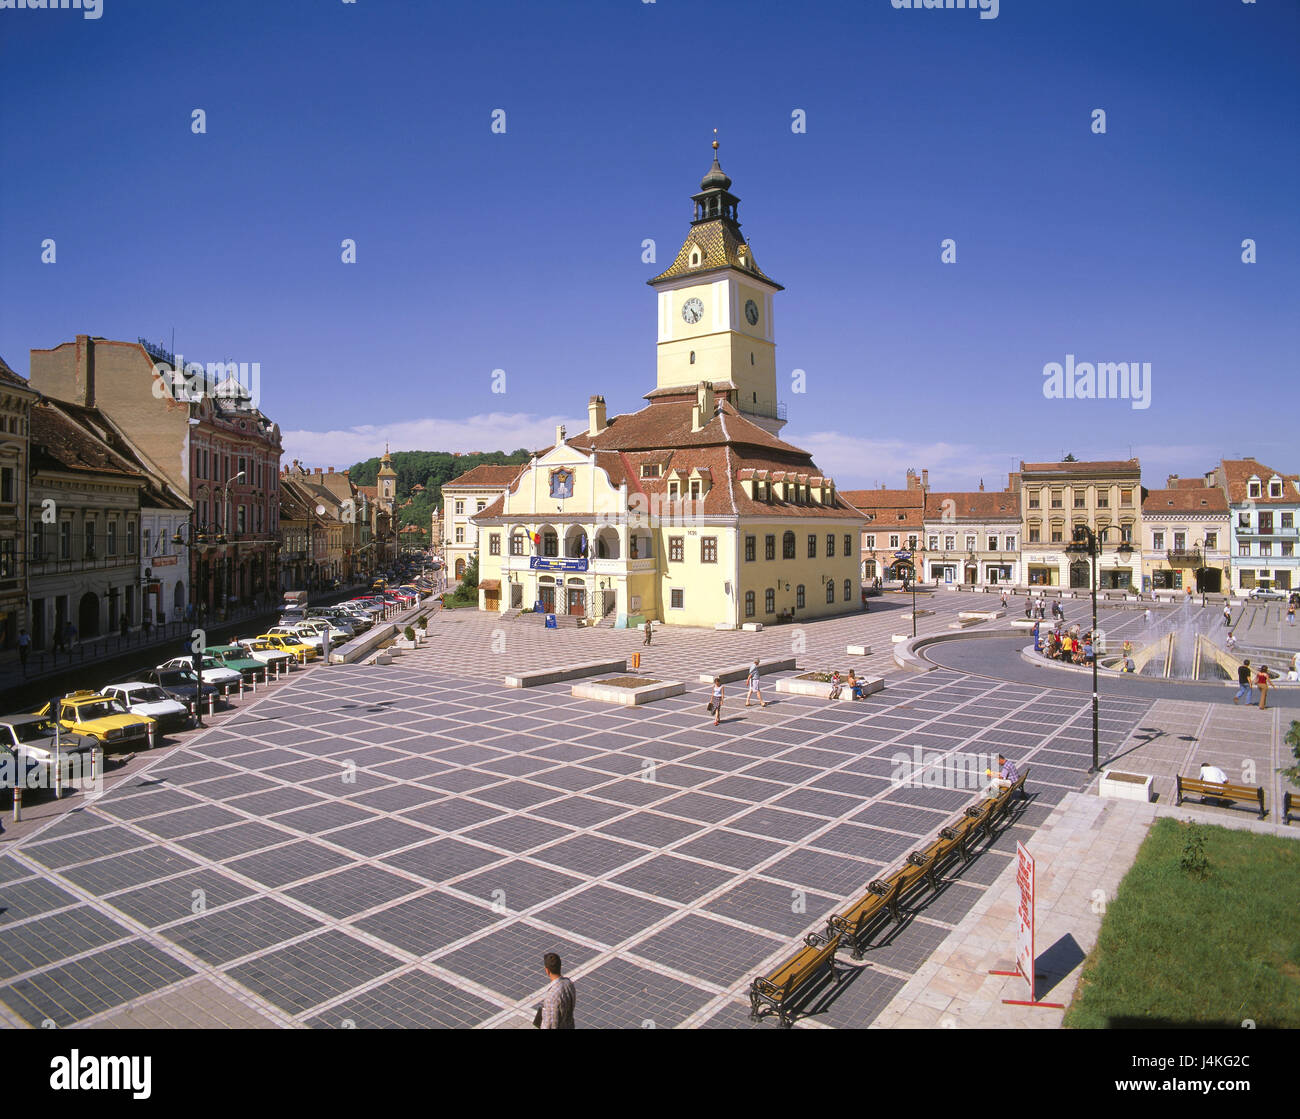 Romania, Brasov, Piata Sfatului, city hall, in 1420 Southeast Europe, the Balkans, south cirque godfather, Kronstadt, town, houses, marketplace, city hall building, Primaria, building, structure, architecture, place of interest Stock Photo